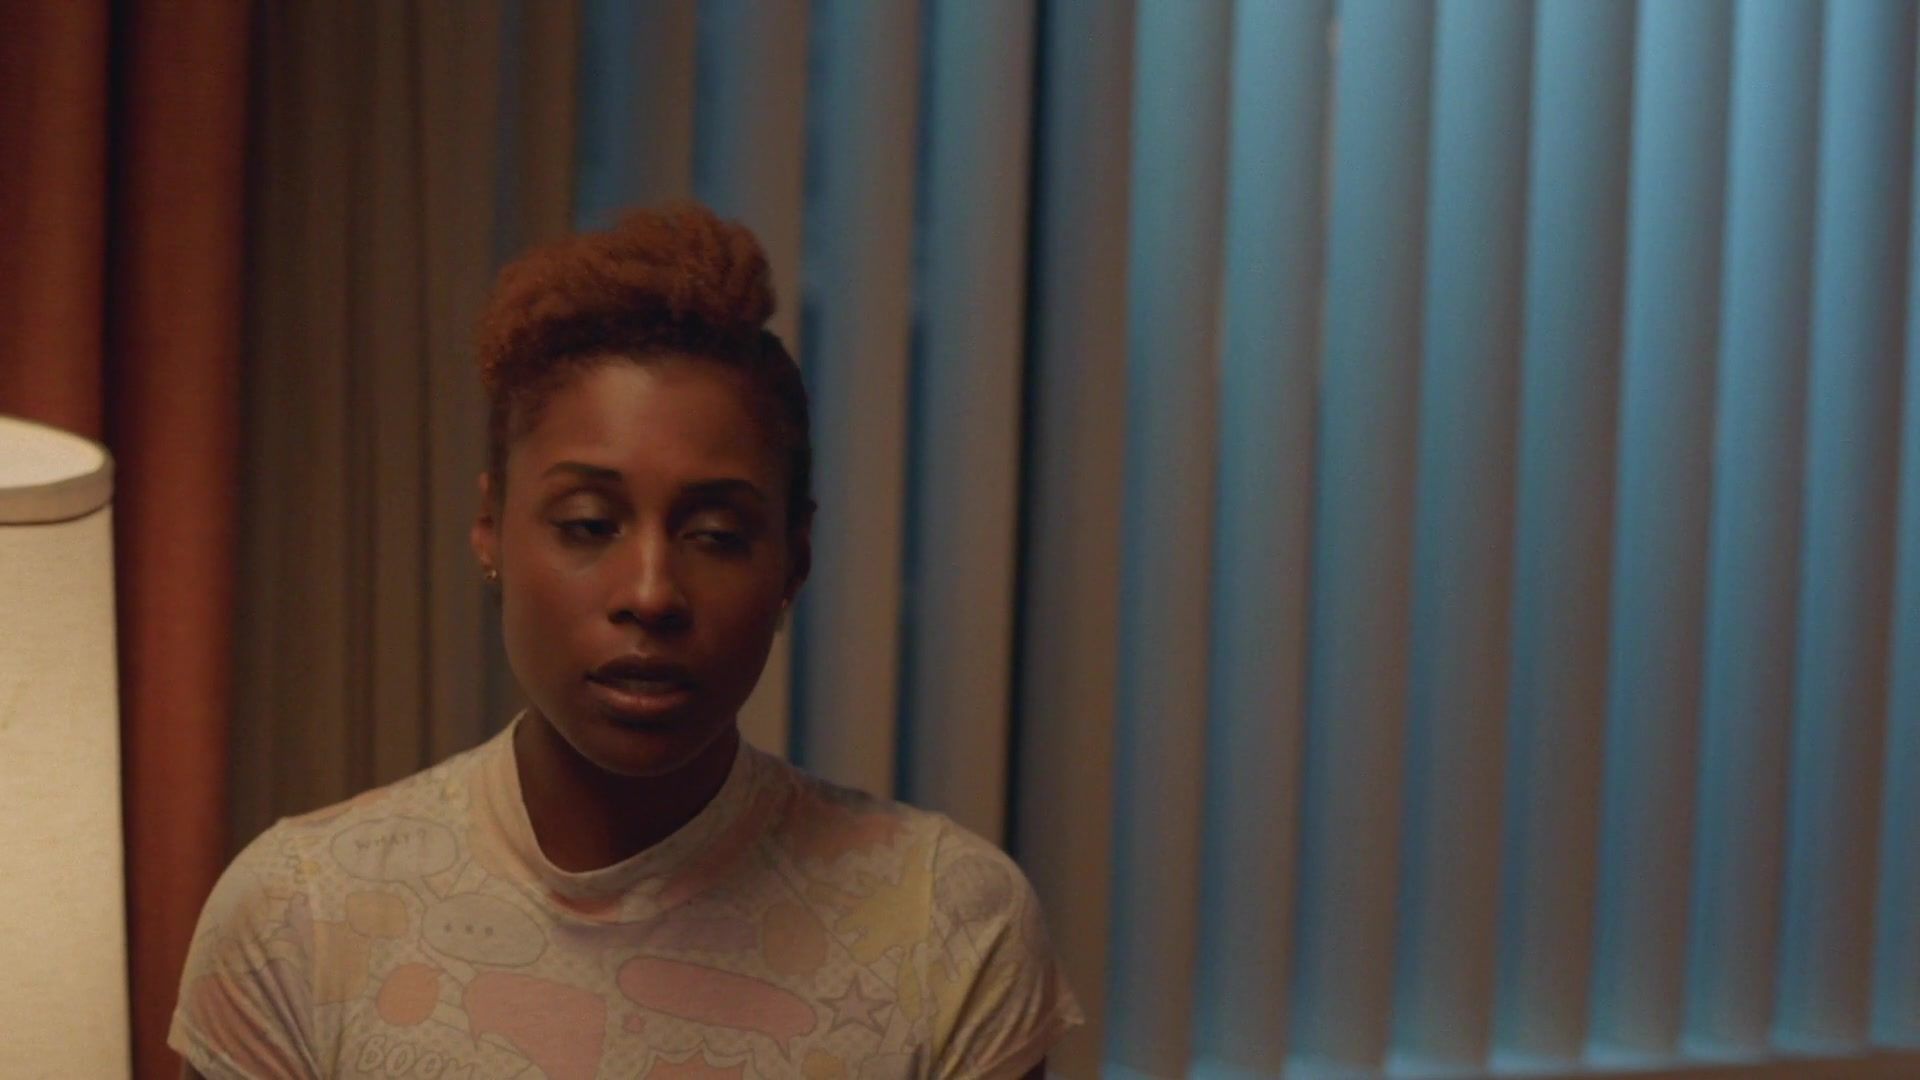 Gay Pov Domnique Perry naked, Issa Rae Naked - Insecure s02e01 (2017) MyCams - 2